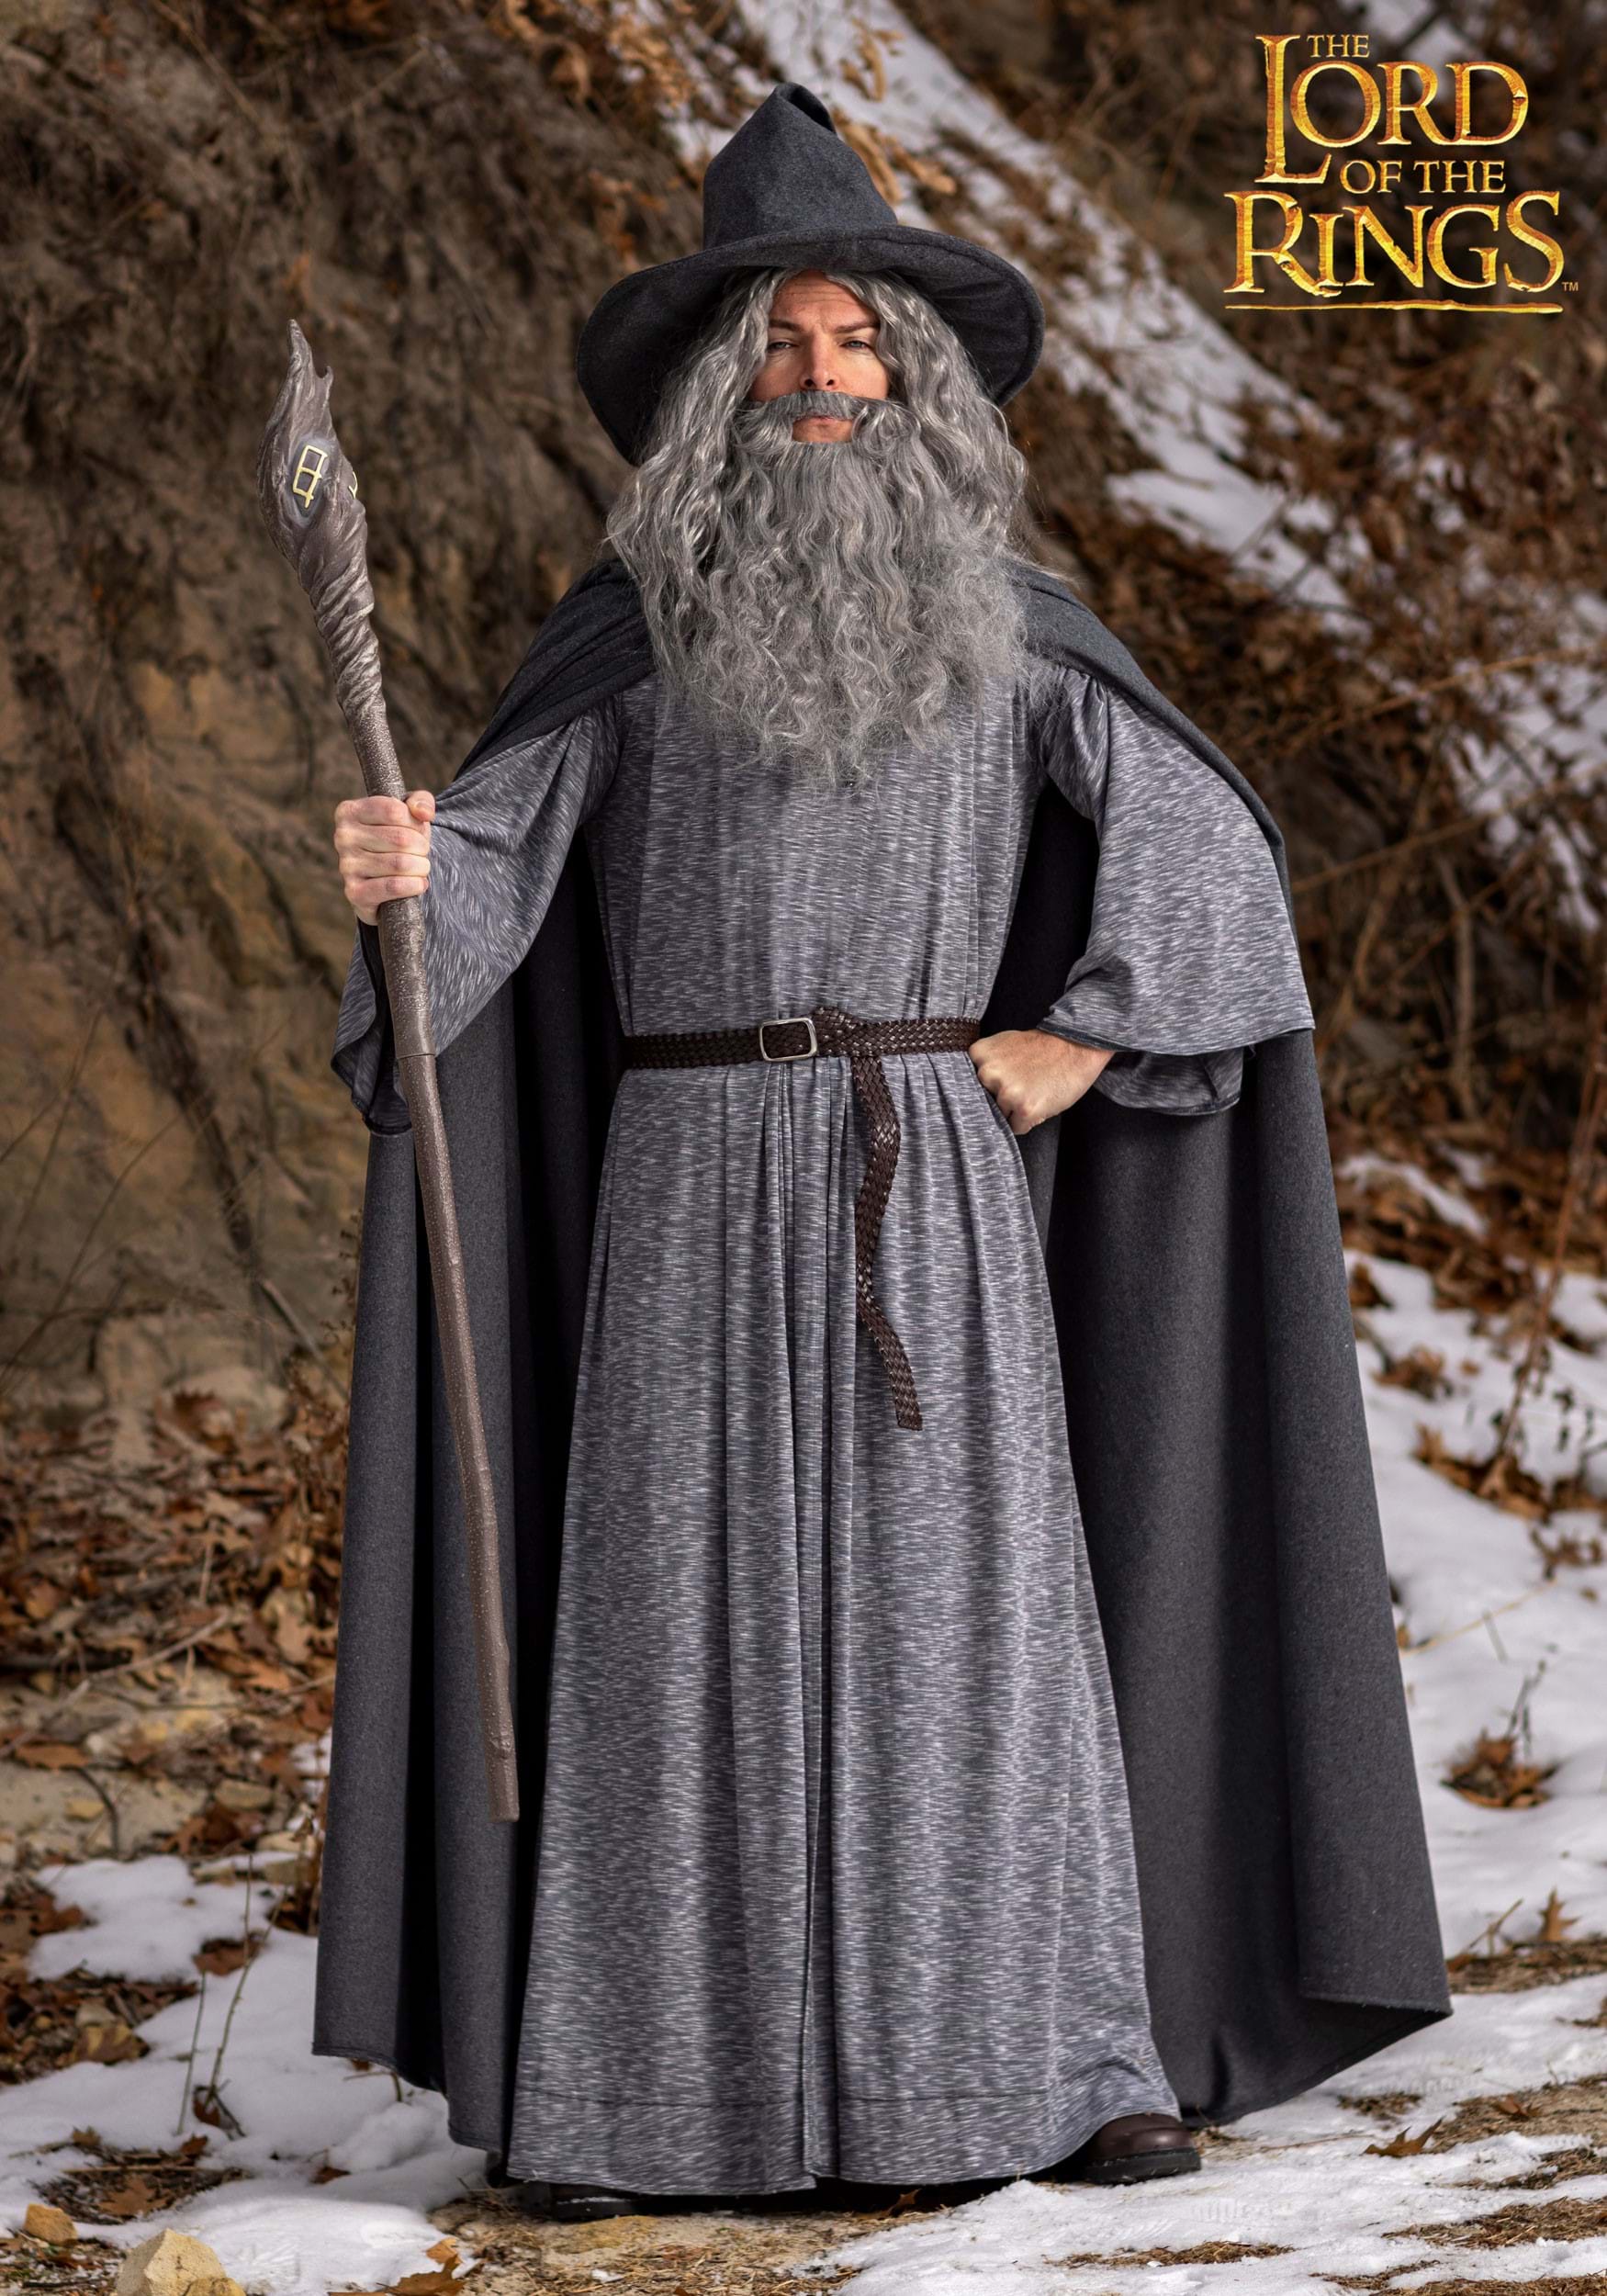 gandalf the grey lord of the rings